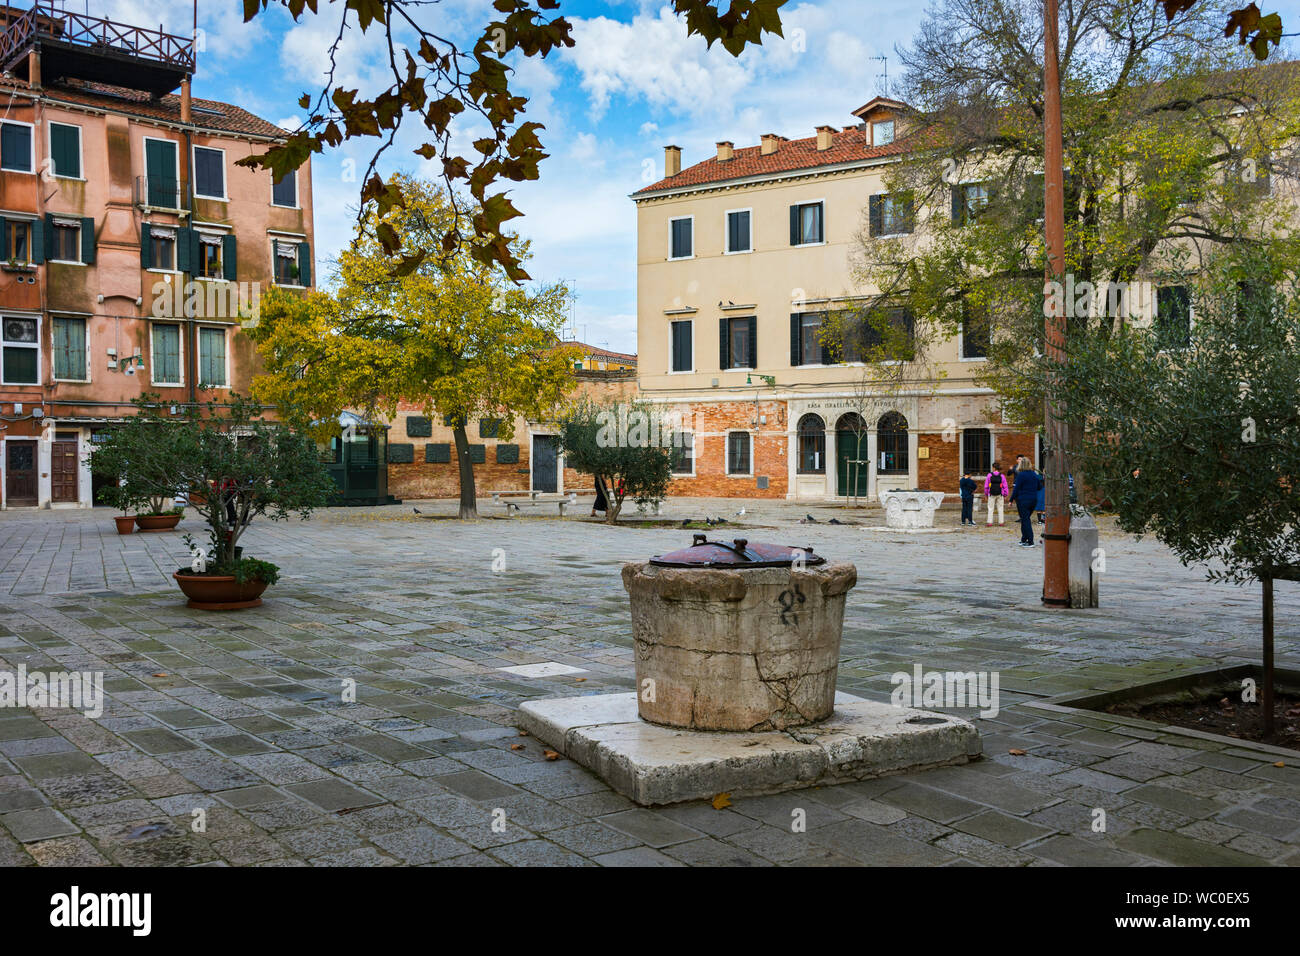 The Campo del Ghetto Nuovo with a well head in the foreground, Venice, Italy Stock Photo